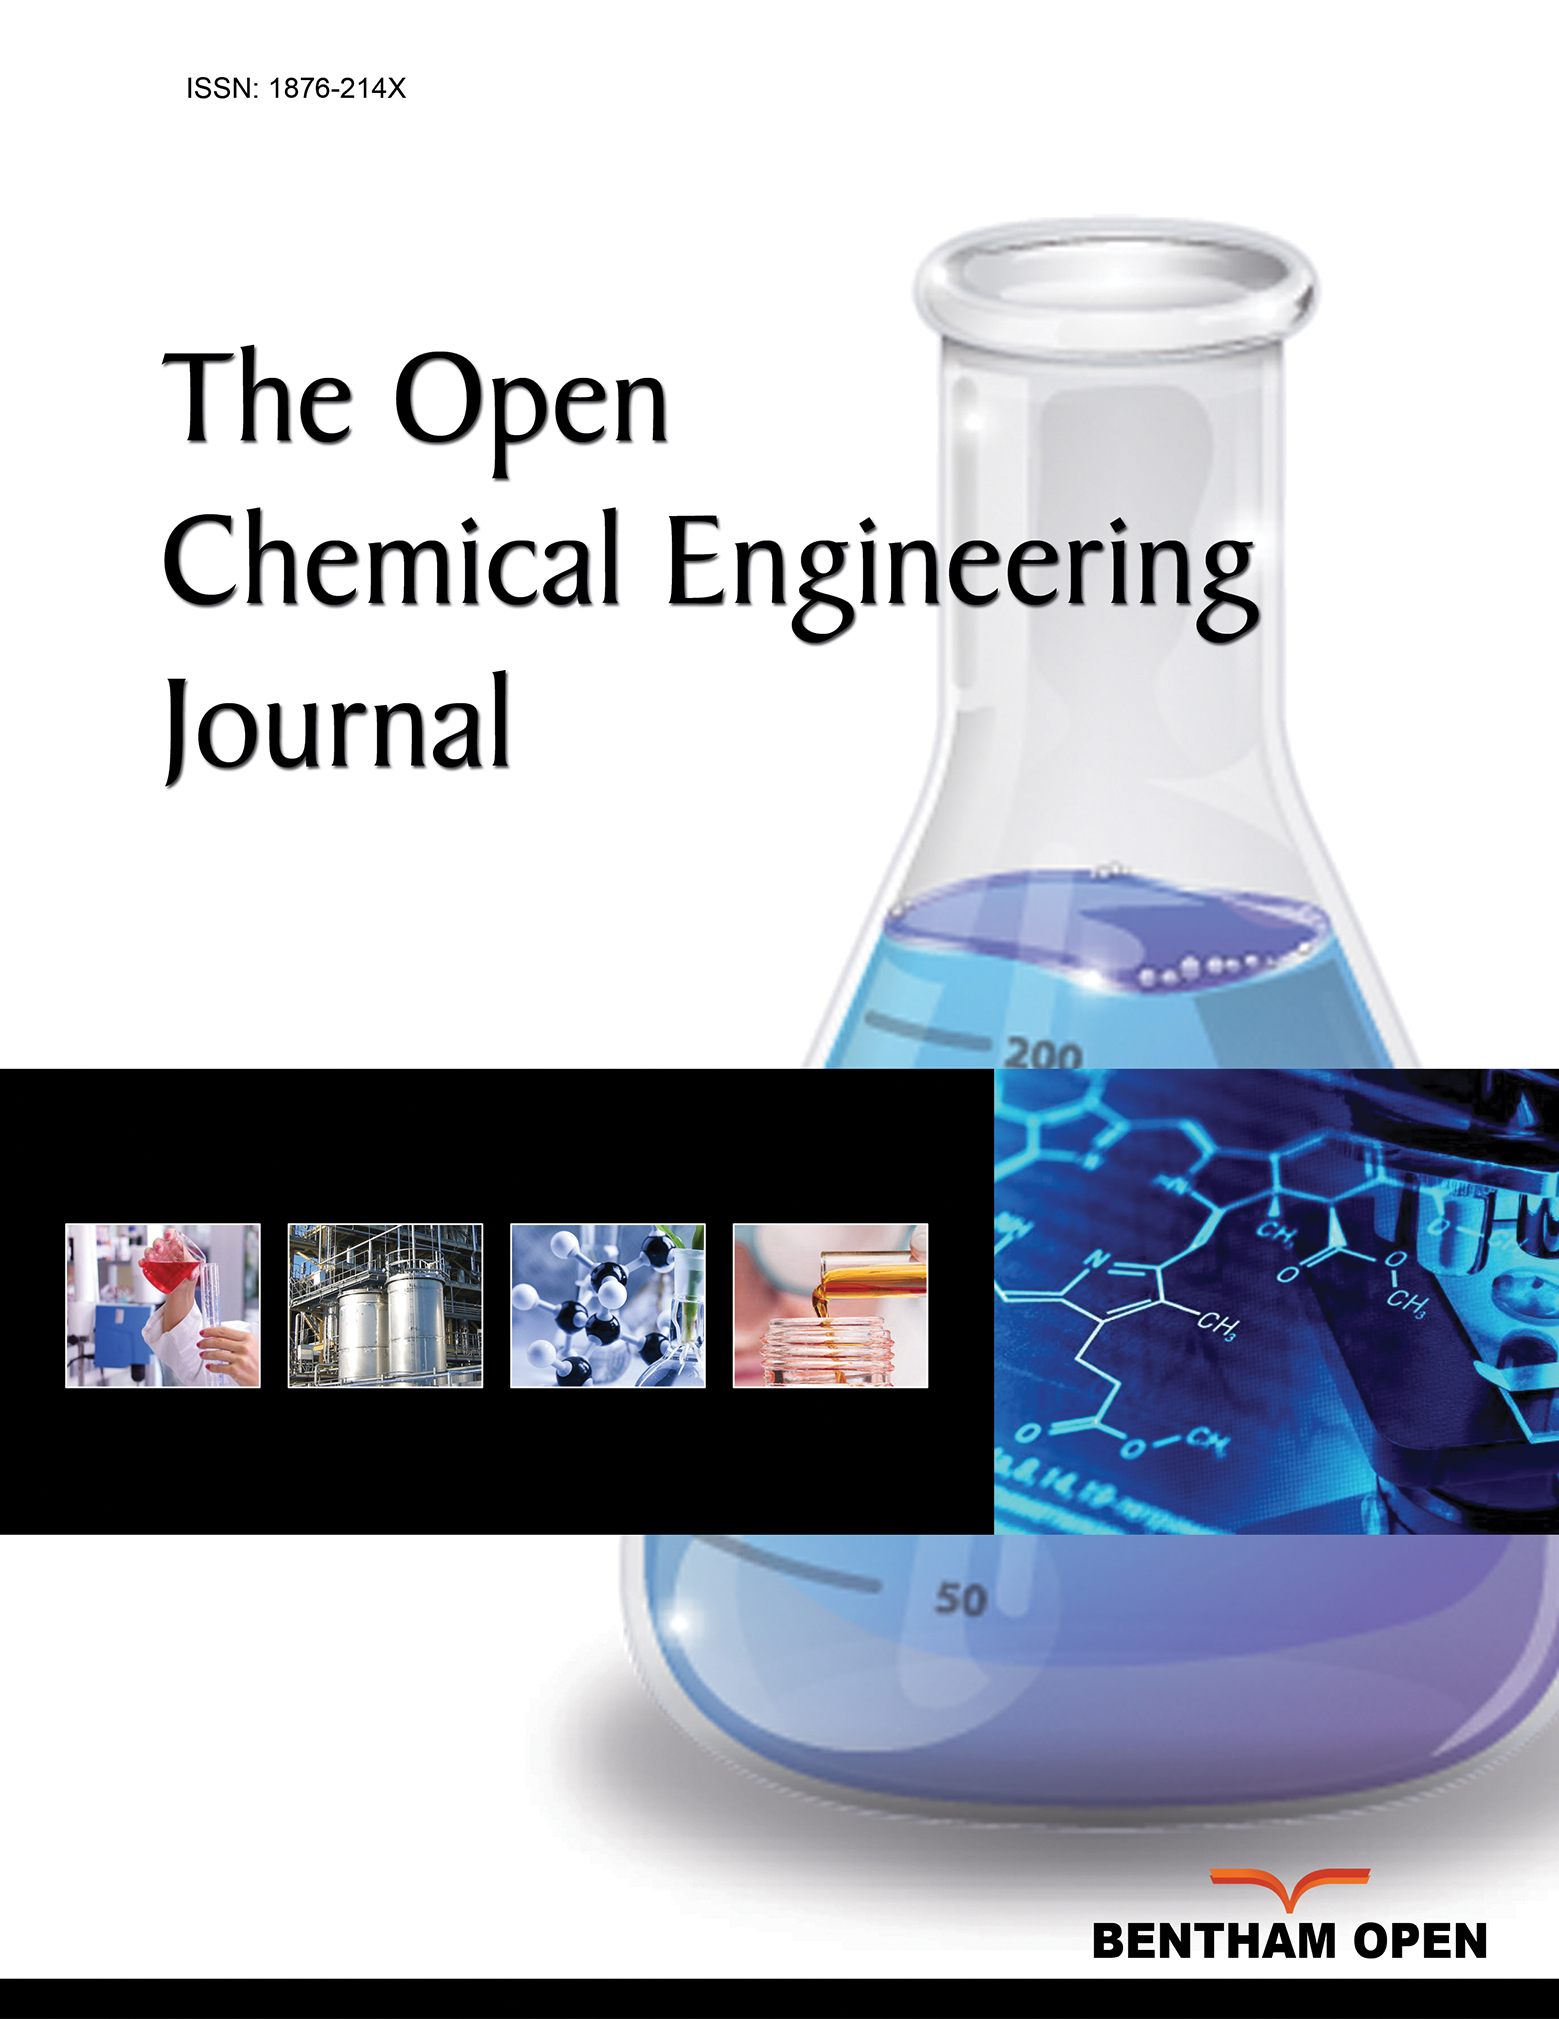 The Open Chemical Engineering Journal